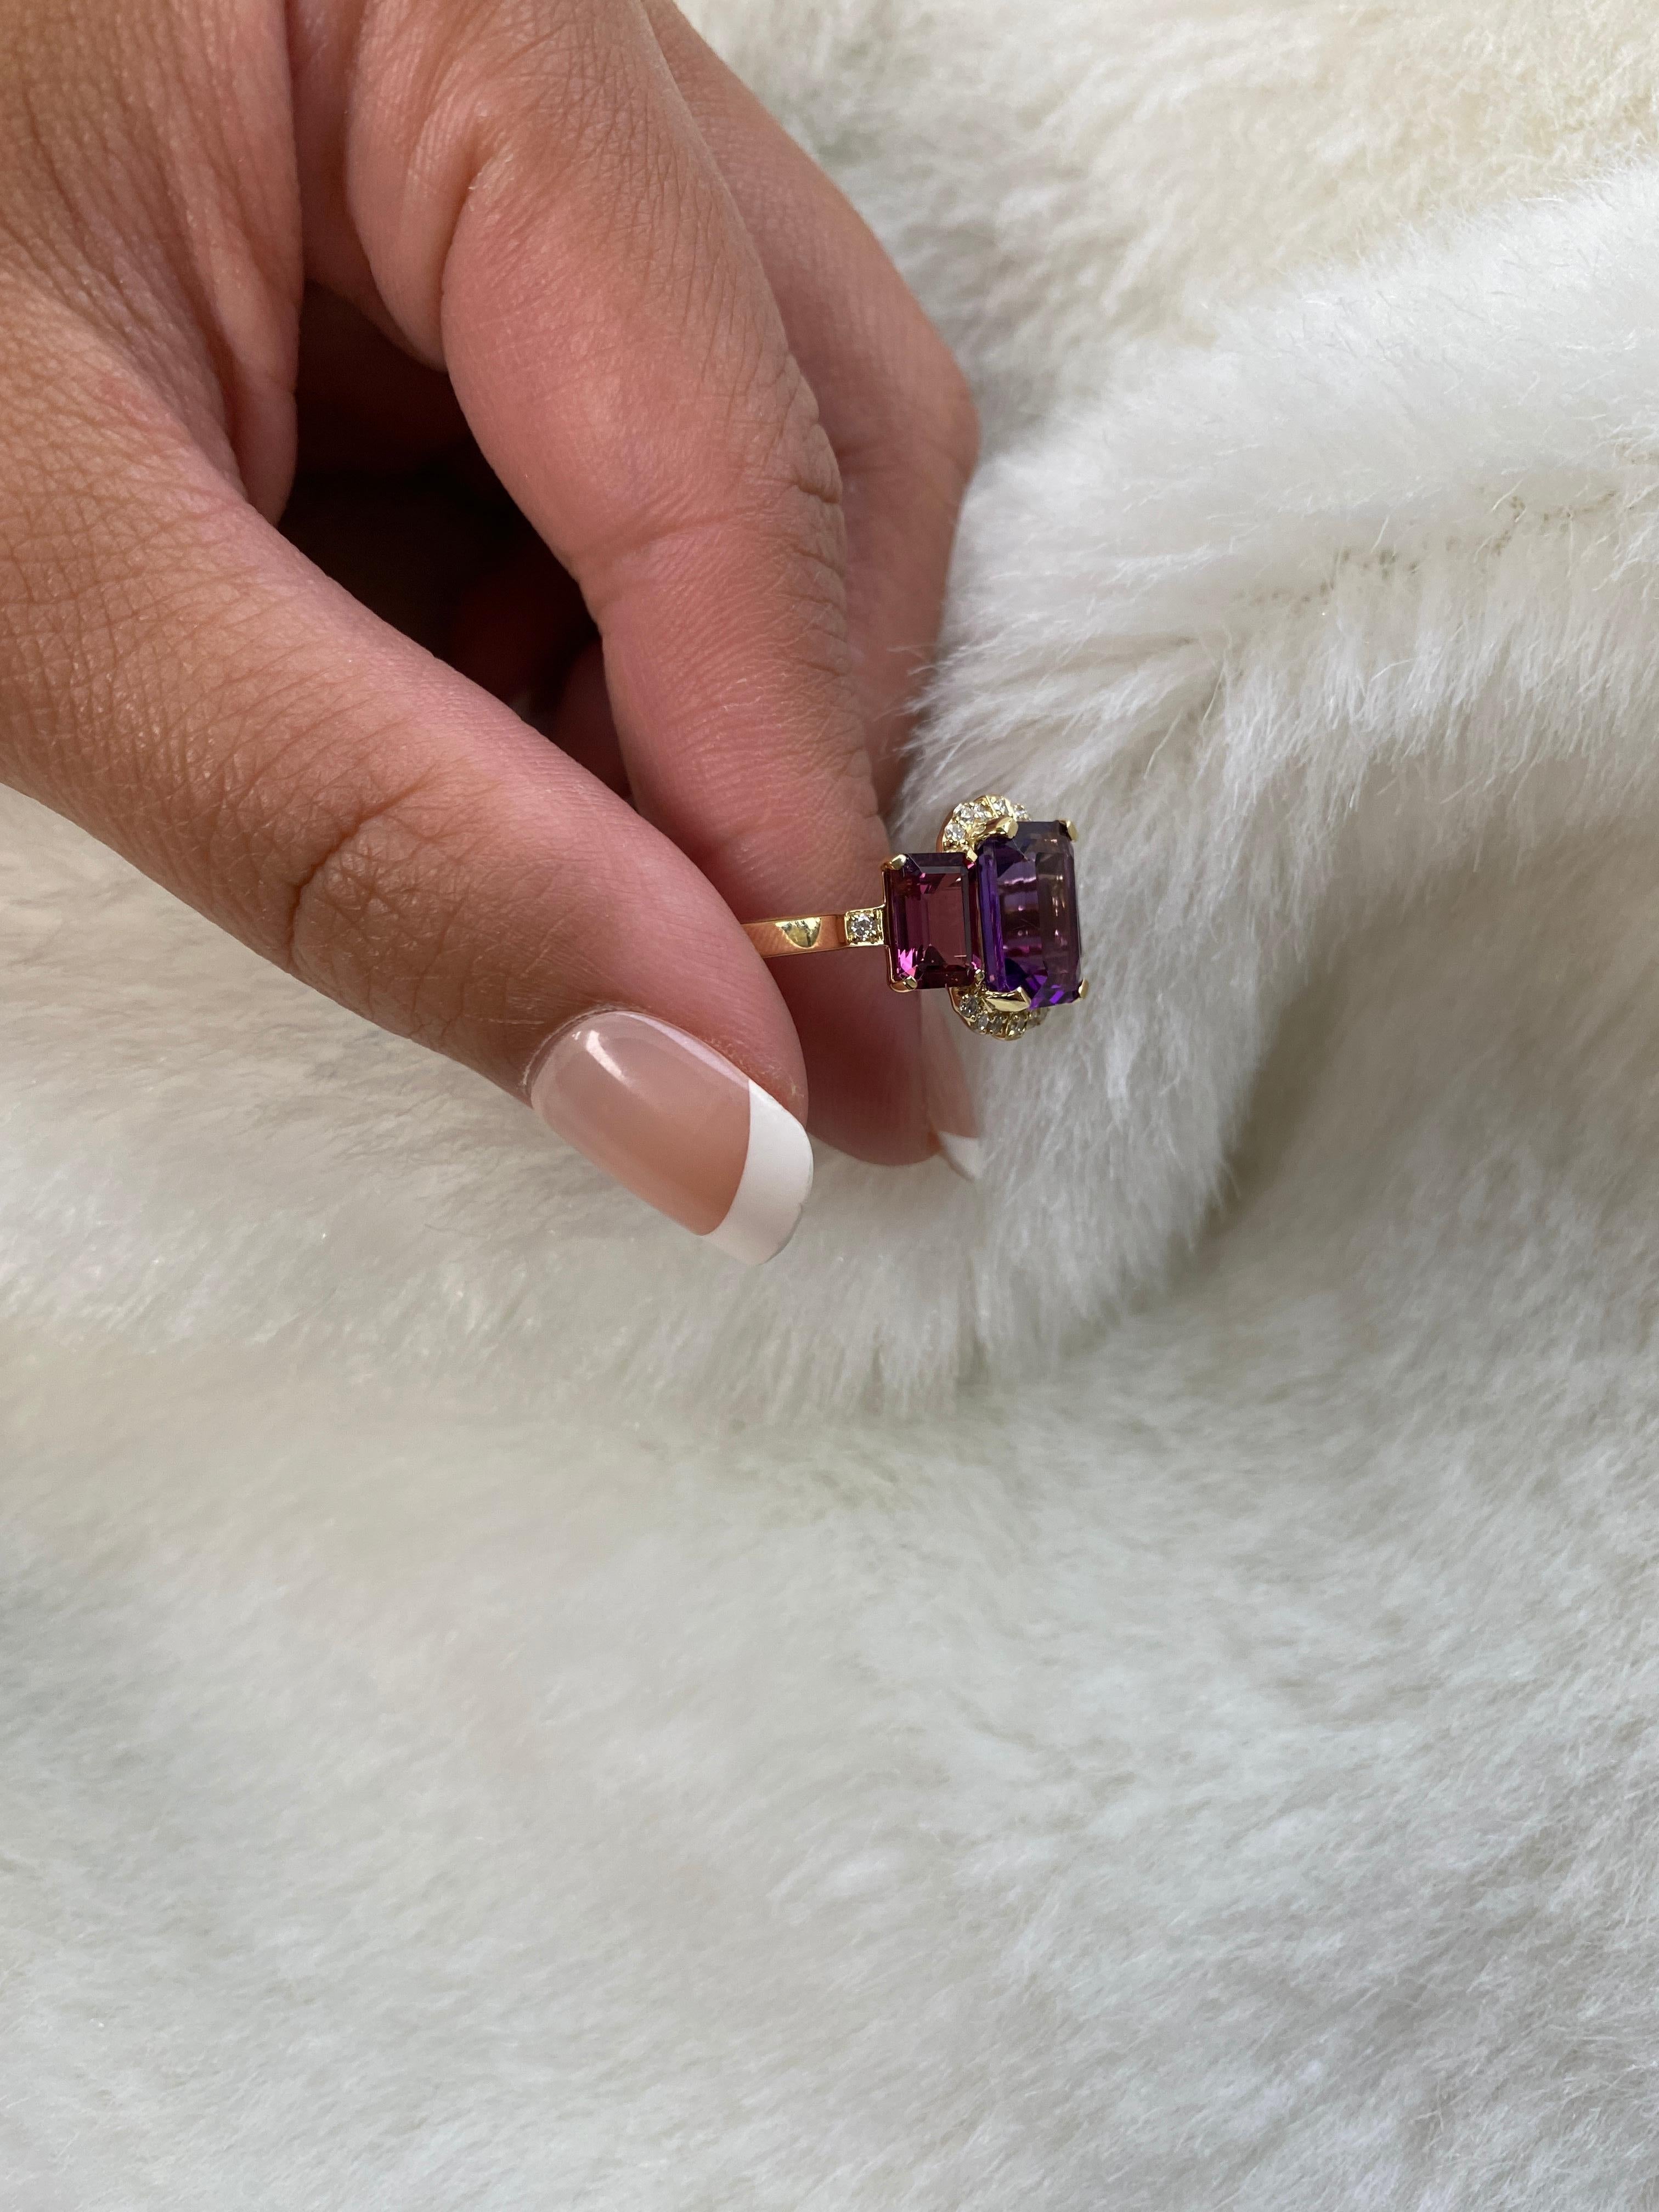 A perfect combination of Amethyst and Garnet is this 3 Stone Emerald Cut Ring with Diamonds set in 18K Yellow Gold. From our popular 'Gossip' Collection, this piece carries a hint of shock value.

* Stone Size: 10 x 8 - 7 x 5 mm
* Gemstone: 100%